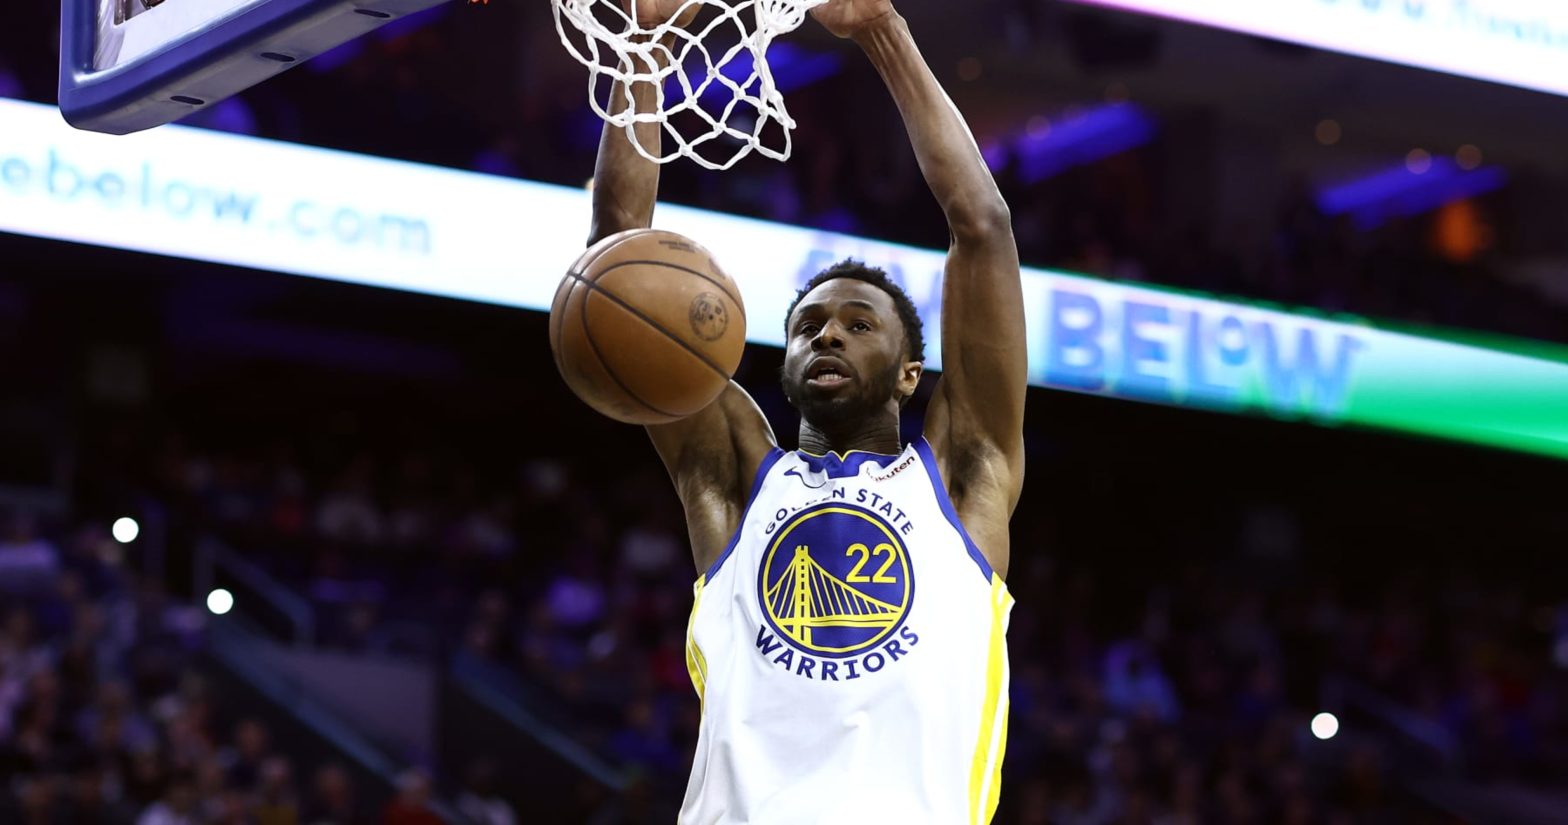 Wiggins Impresses NBA Fans Amid Trade Rumors as Curry, Warriors Top Embiid-Less 76ers